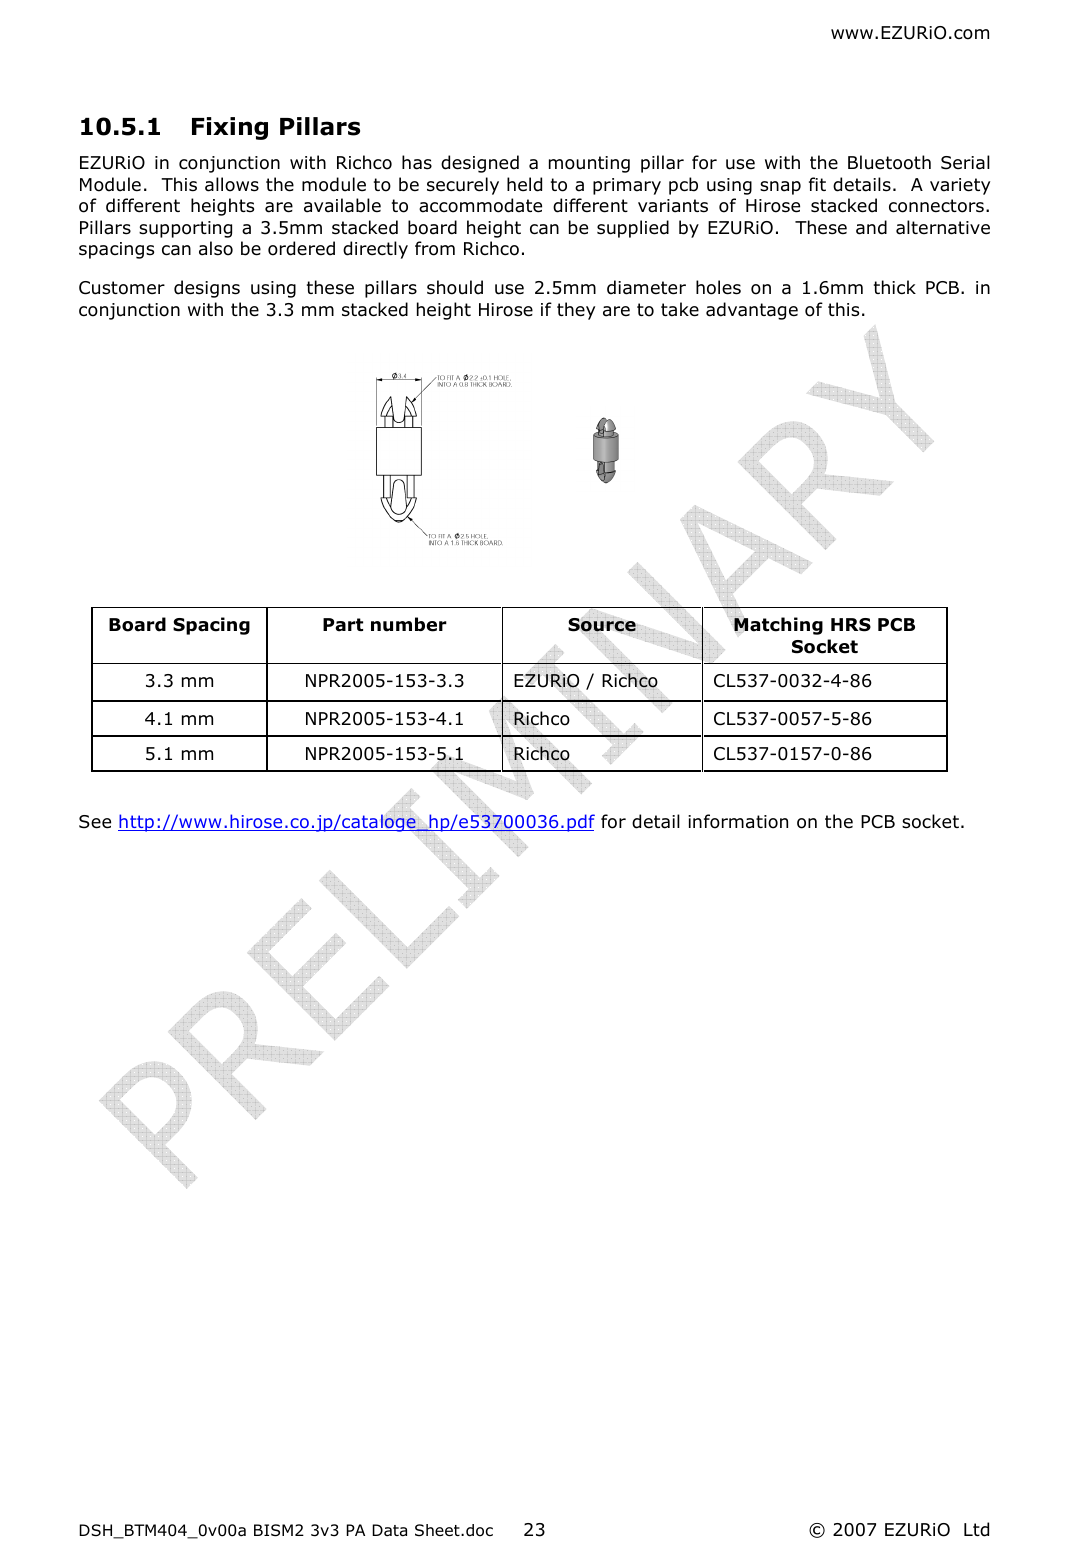 www.EZURiO.com DSH_BTM404_0v00a BISM2 3v3 PA Data Sheet.doc  © 2007 EZURiO  Ltd  23 10.5.1 Fixing Pillars   EZURiO  in  conjunction  with  Richco  has  designed  a  mounting pillar for use with the Bluetooth Serial Module.  This allows the module to be securely held to a primary pcb using snap fit details.  A variety of  different  heights  are  available  to  accommodate  different  variants  of  Hirose  stacked  connectors.  Pillars supporting a 3.5mm stacked board height can be supplied by EZURiO.  These and alternative spacings can also be ordered directly from Richco. Customer  designs  using  these  pillars  should  use  2.5mm  diameter  holes  on  a  1.6mm  thick  PCB.  in conjunction with the 3.3 mm stacked height Hirose if they are to take advantage of this.           See http://www.hirose.co.jp/cataloge_hp/e53700036.pdf for detail information on the PCB socket.         Board Spacing  Part number  Source   Matching HRS PCB Socket 3.3 mm  NPR2005-153-3.3  EZURiO / Richco  CL537-0032-4-86 4.1 mm  NPR2005-153-4.1  Richco  CL537-0057-5-86  5.1 mm  NPR2005-153-5.1  Richco   CL537-0157-0-86 